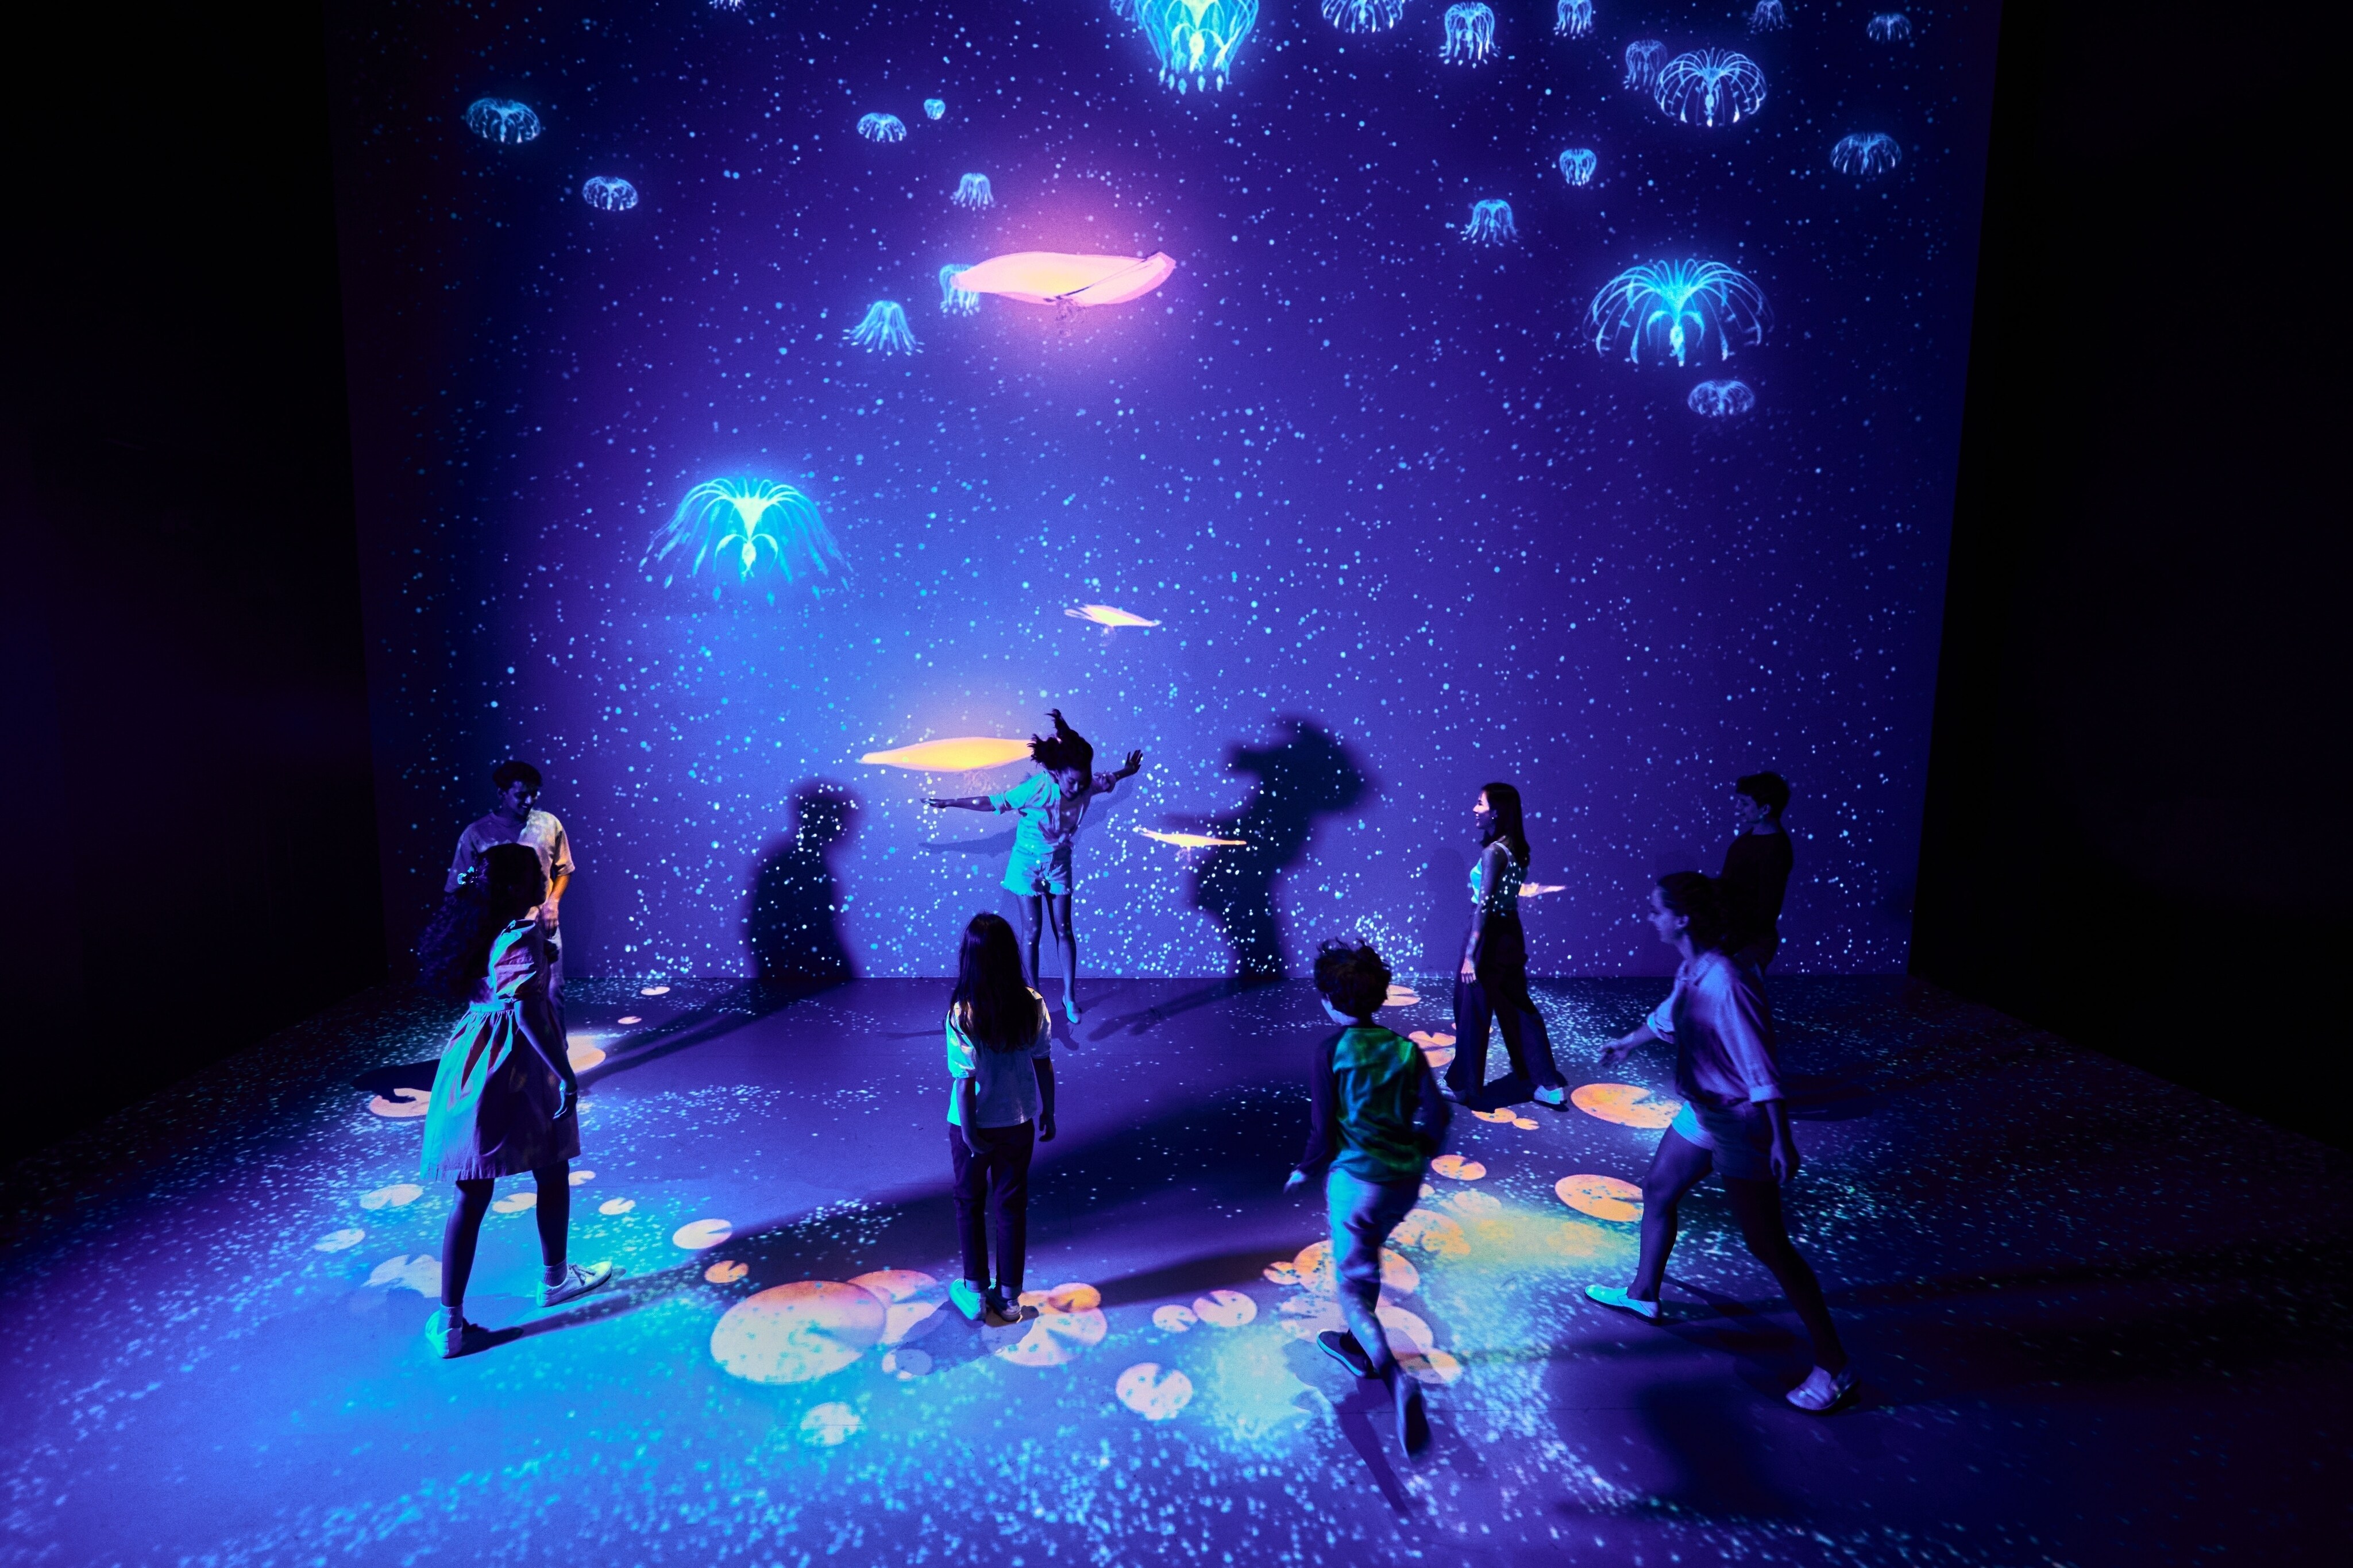 Several people in a room filled with bioluminescent projections of floating woodsprites.